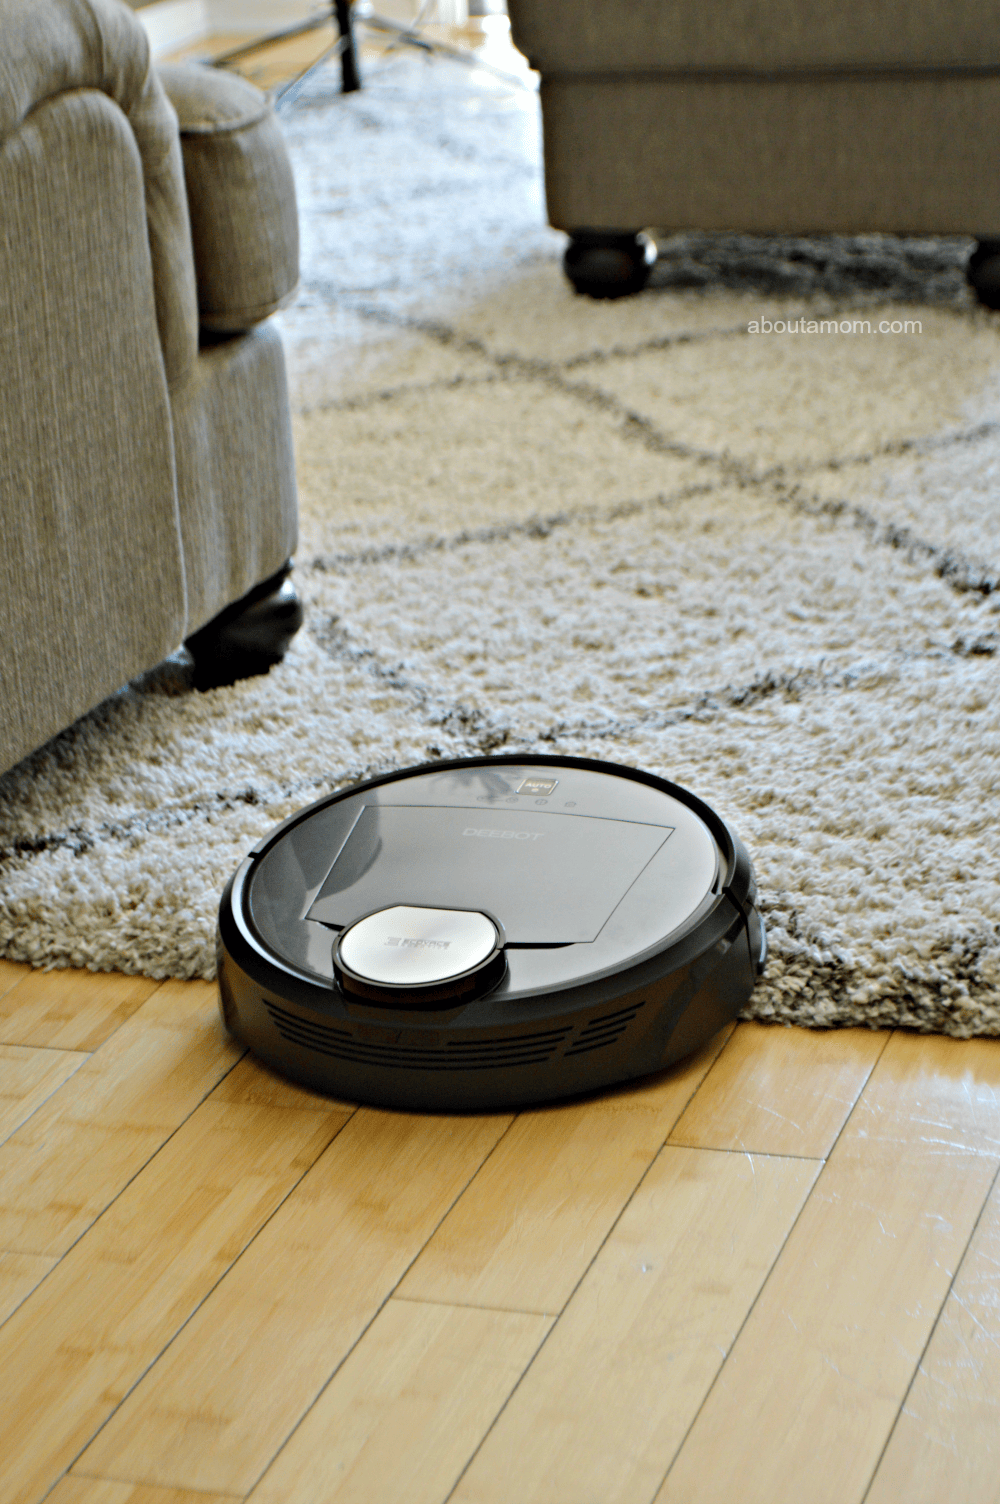 The only thing mom would want more than the R95, would be if you would clean the house everyday for her. Since no one wants to sign up for that, giving her the DEEBOT R95 robot vacuum is the next best choice.